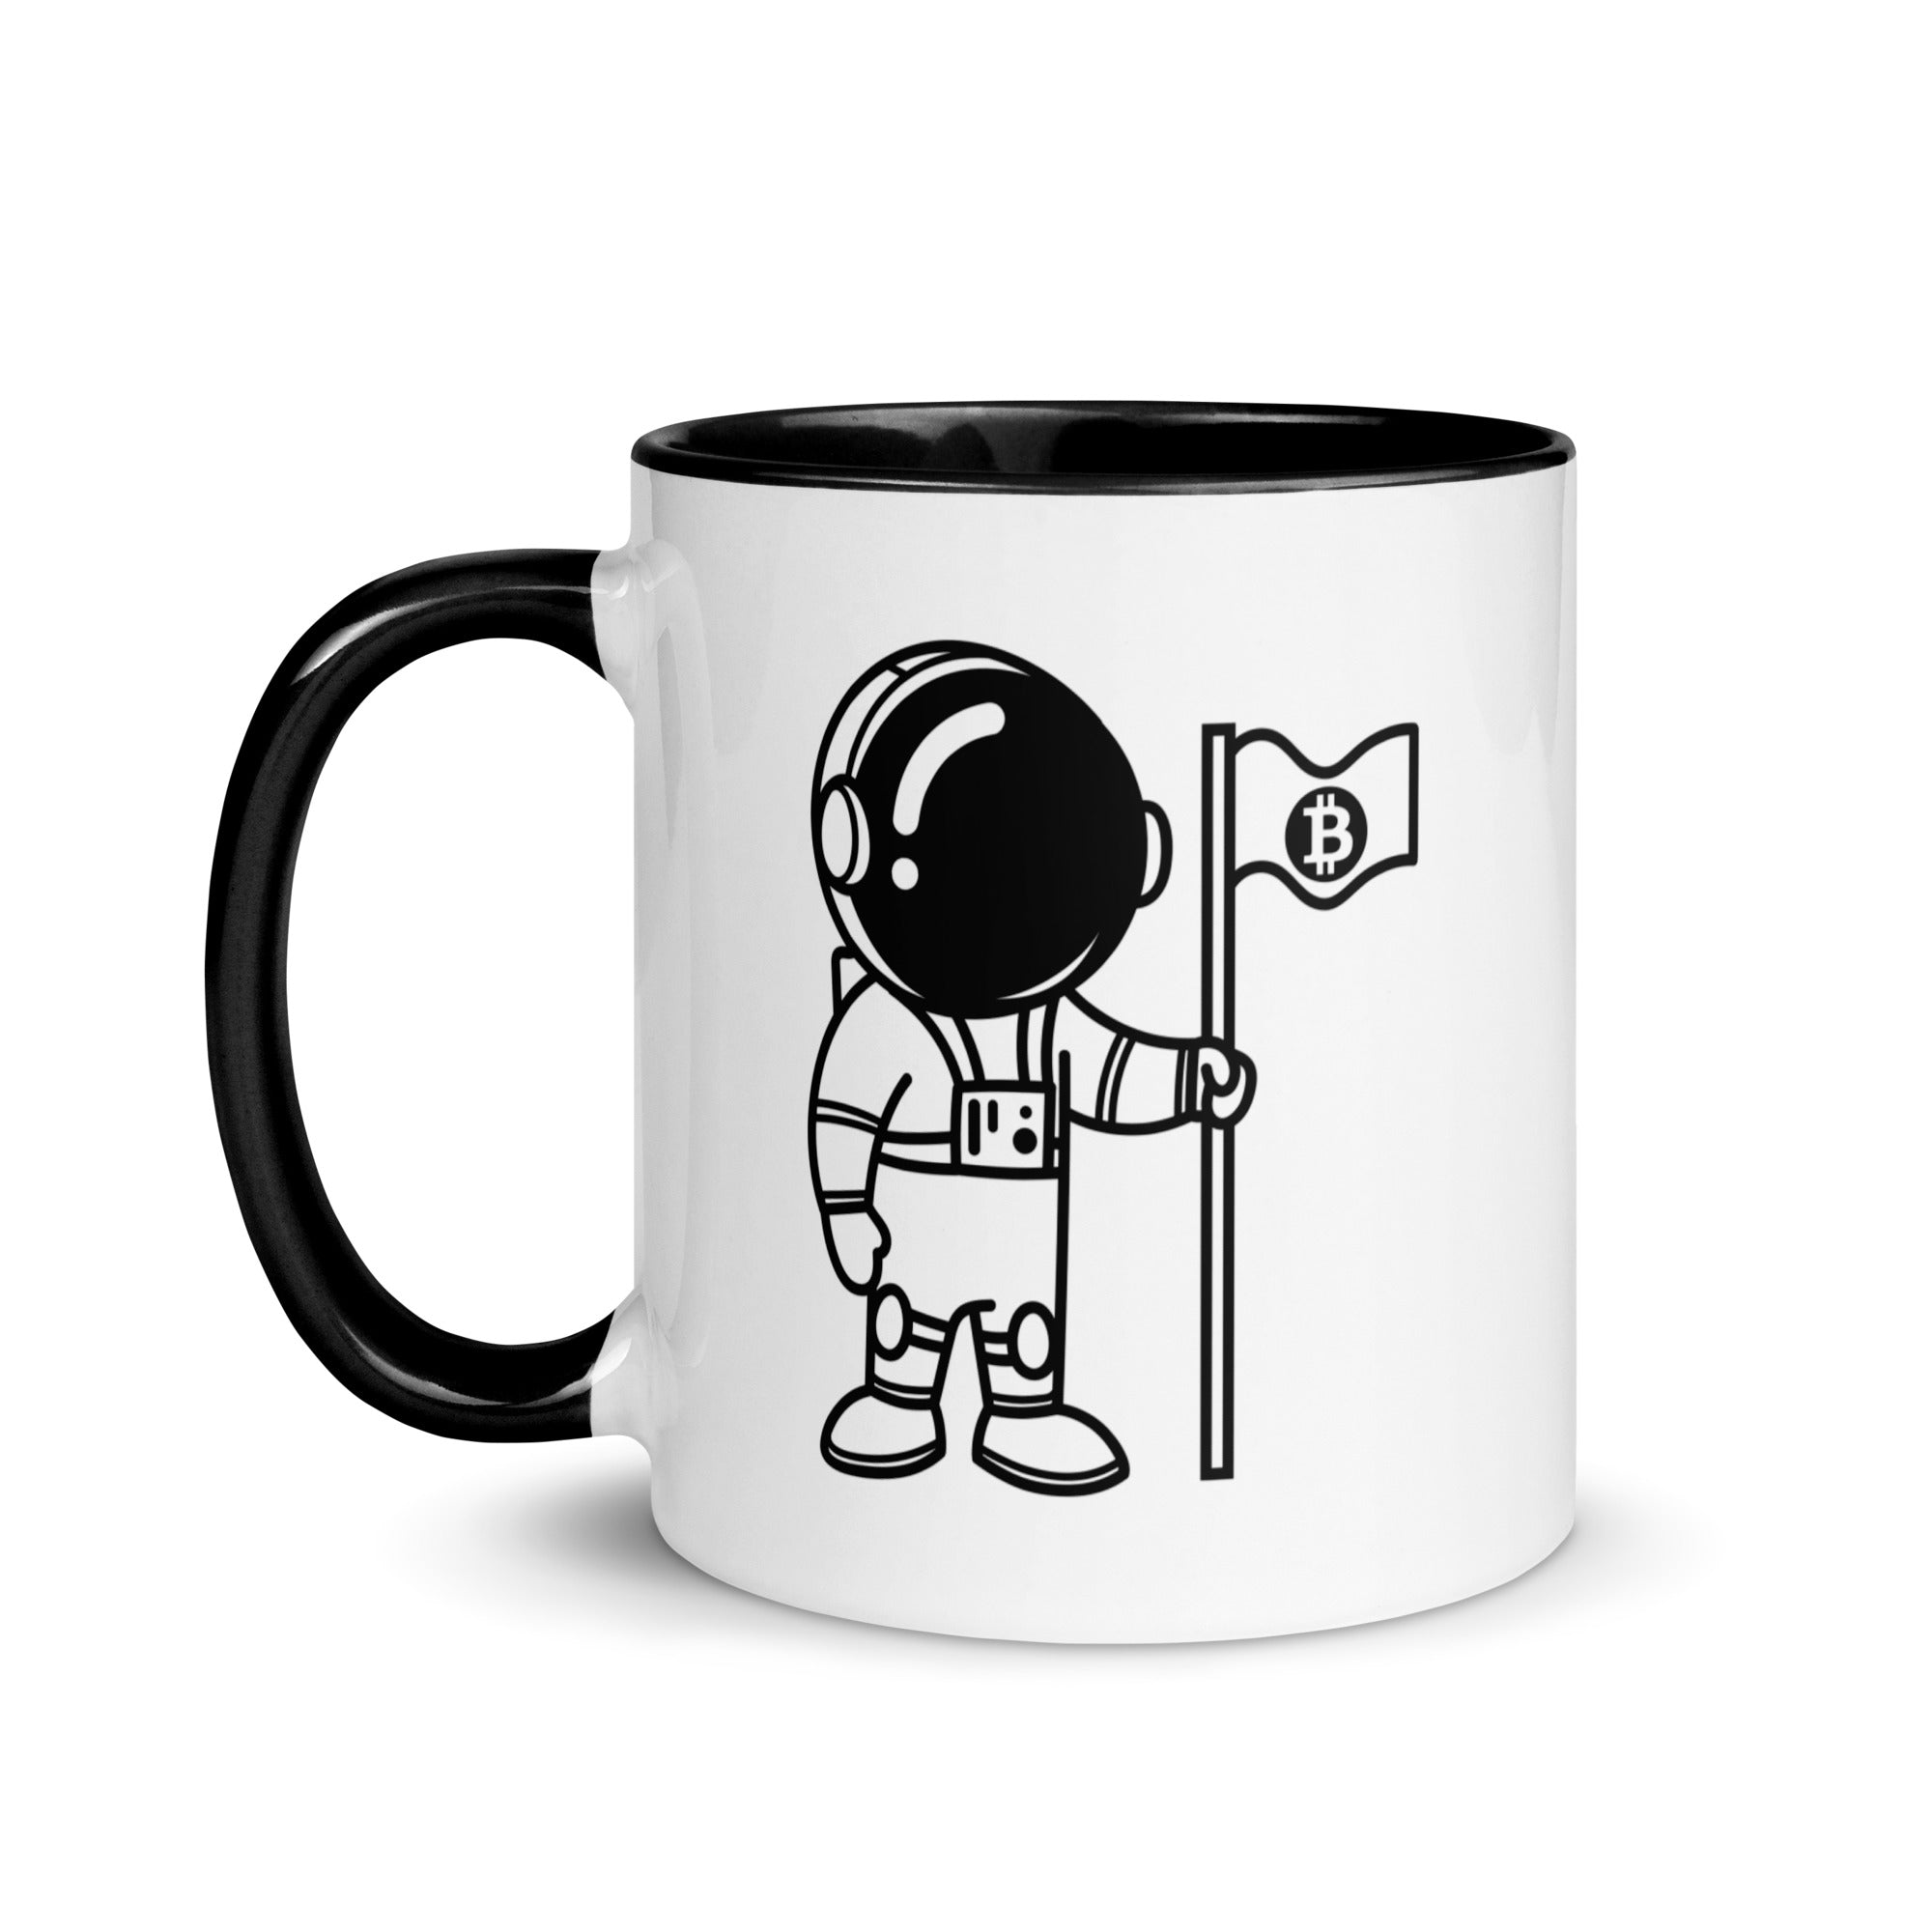 Gifts for Bitcoin Enthusiasts - Bitcoin To The Moon Mug. Left handle view. 